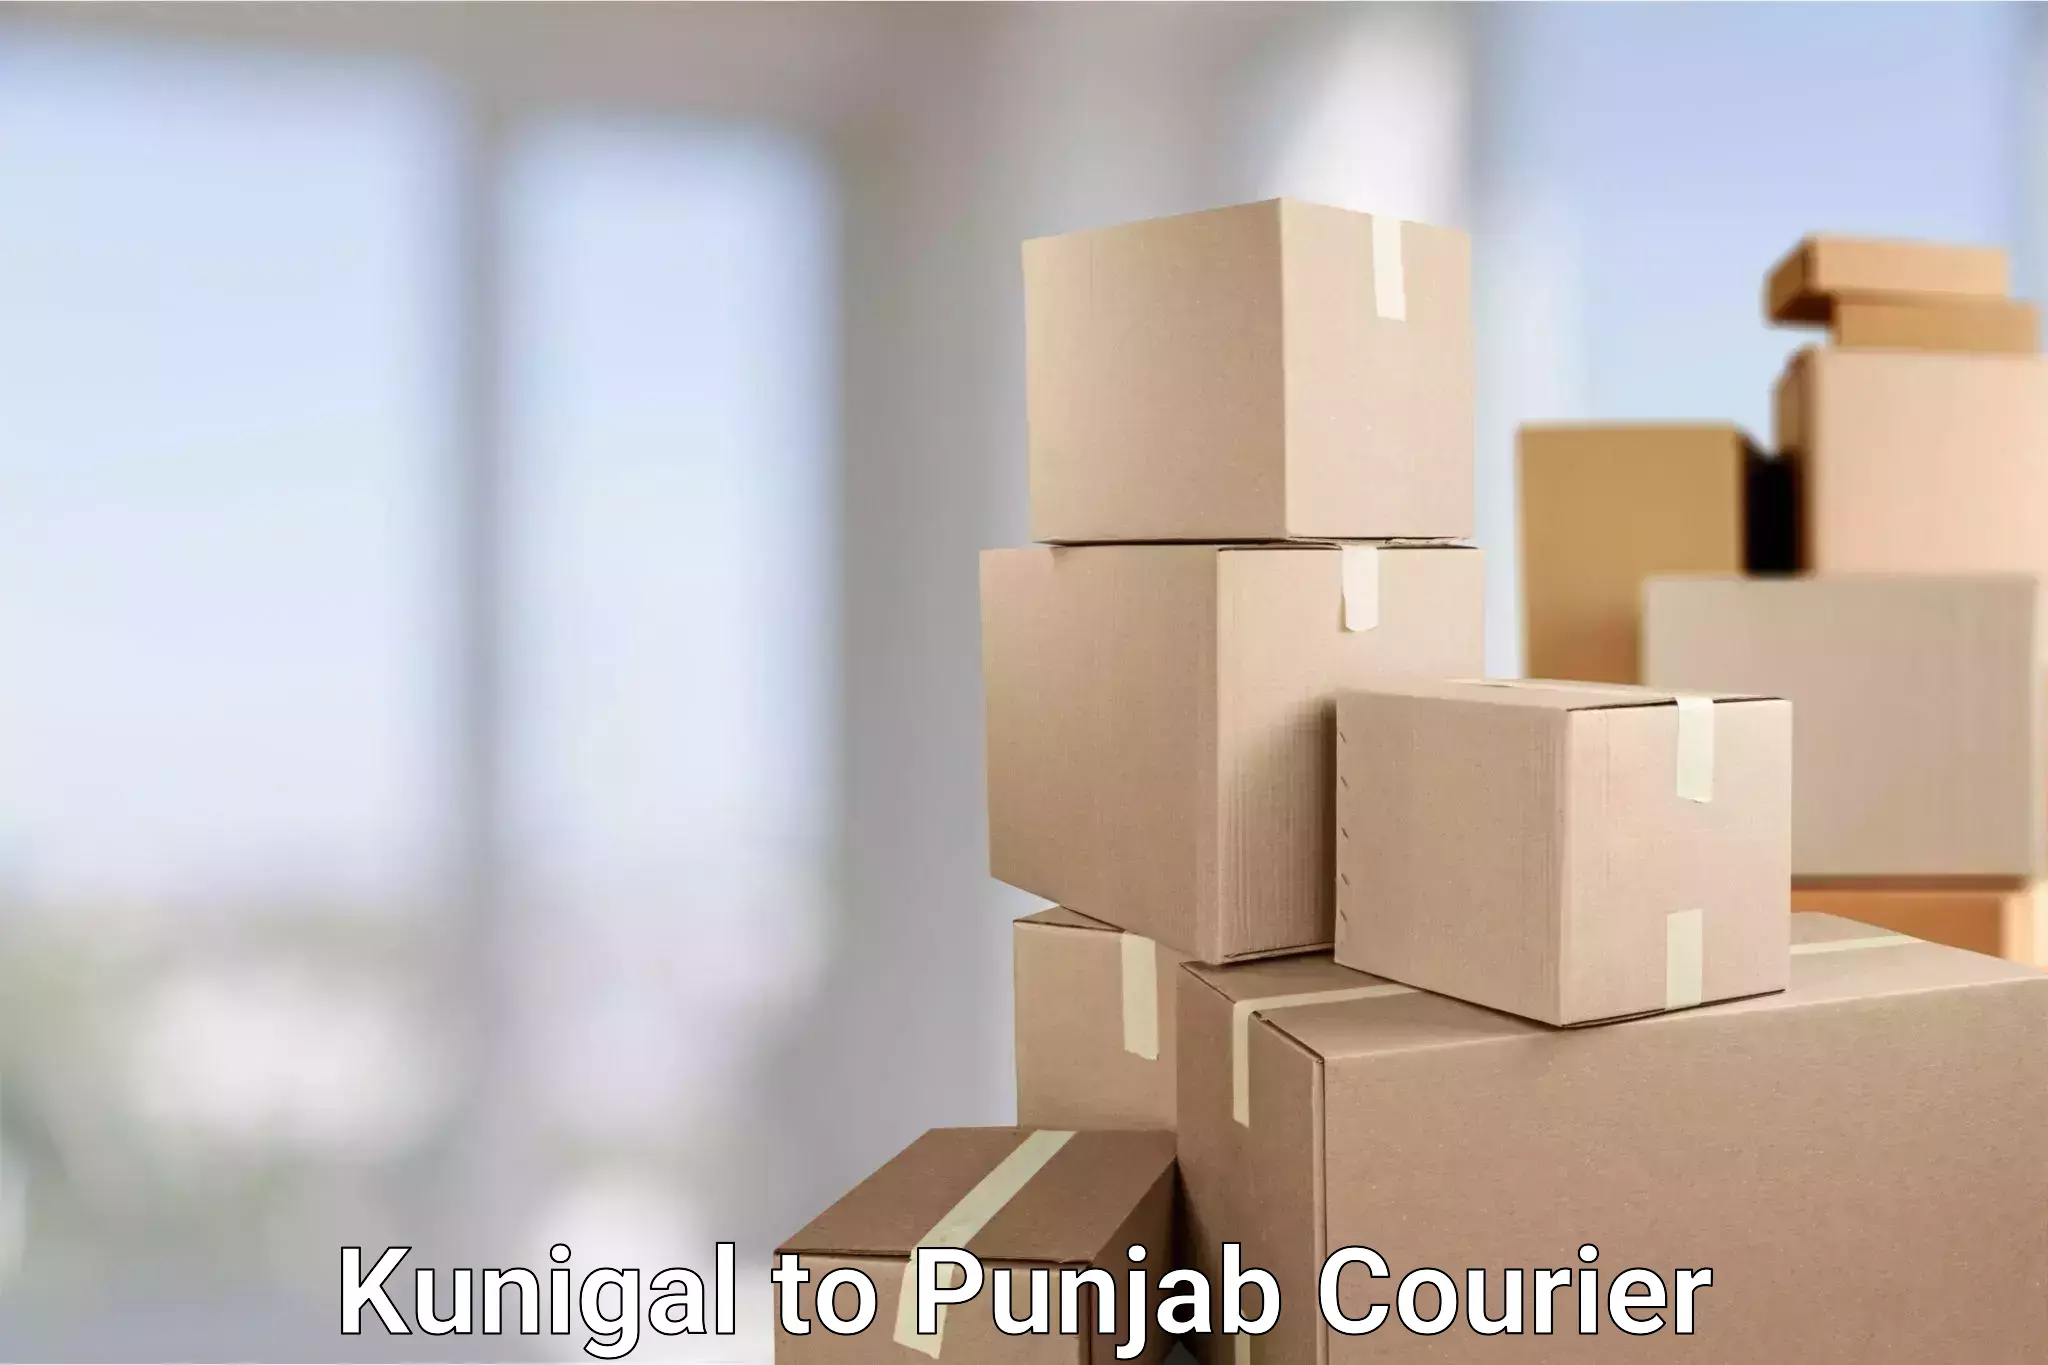 Next-day freight services Kunigal to Punjab